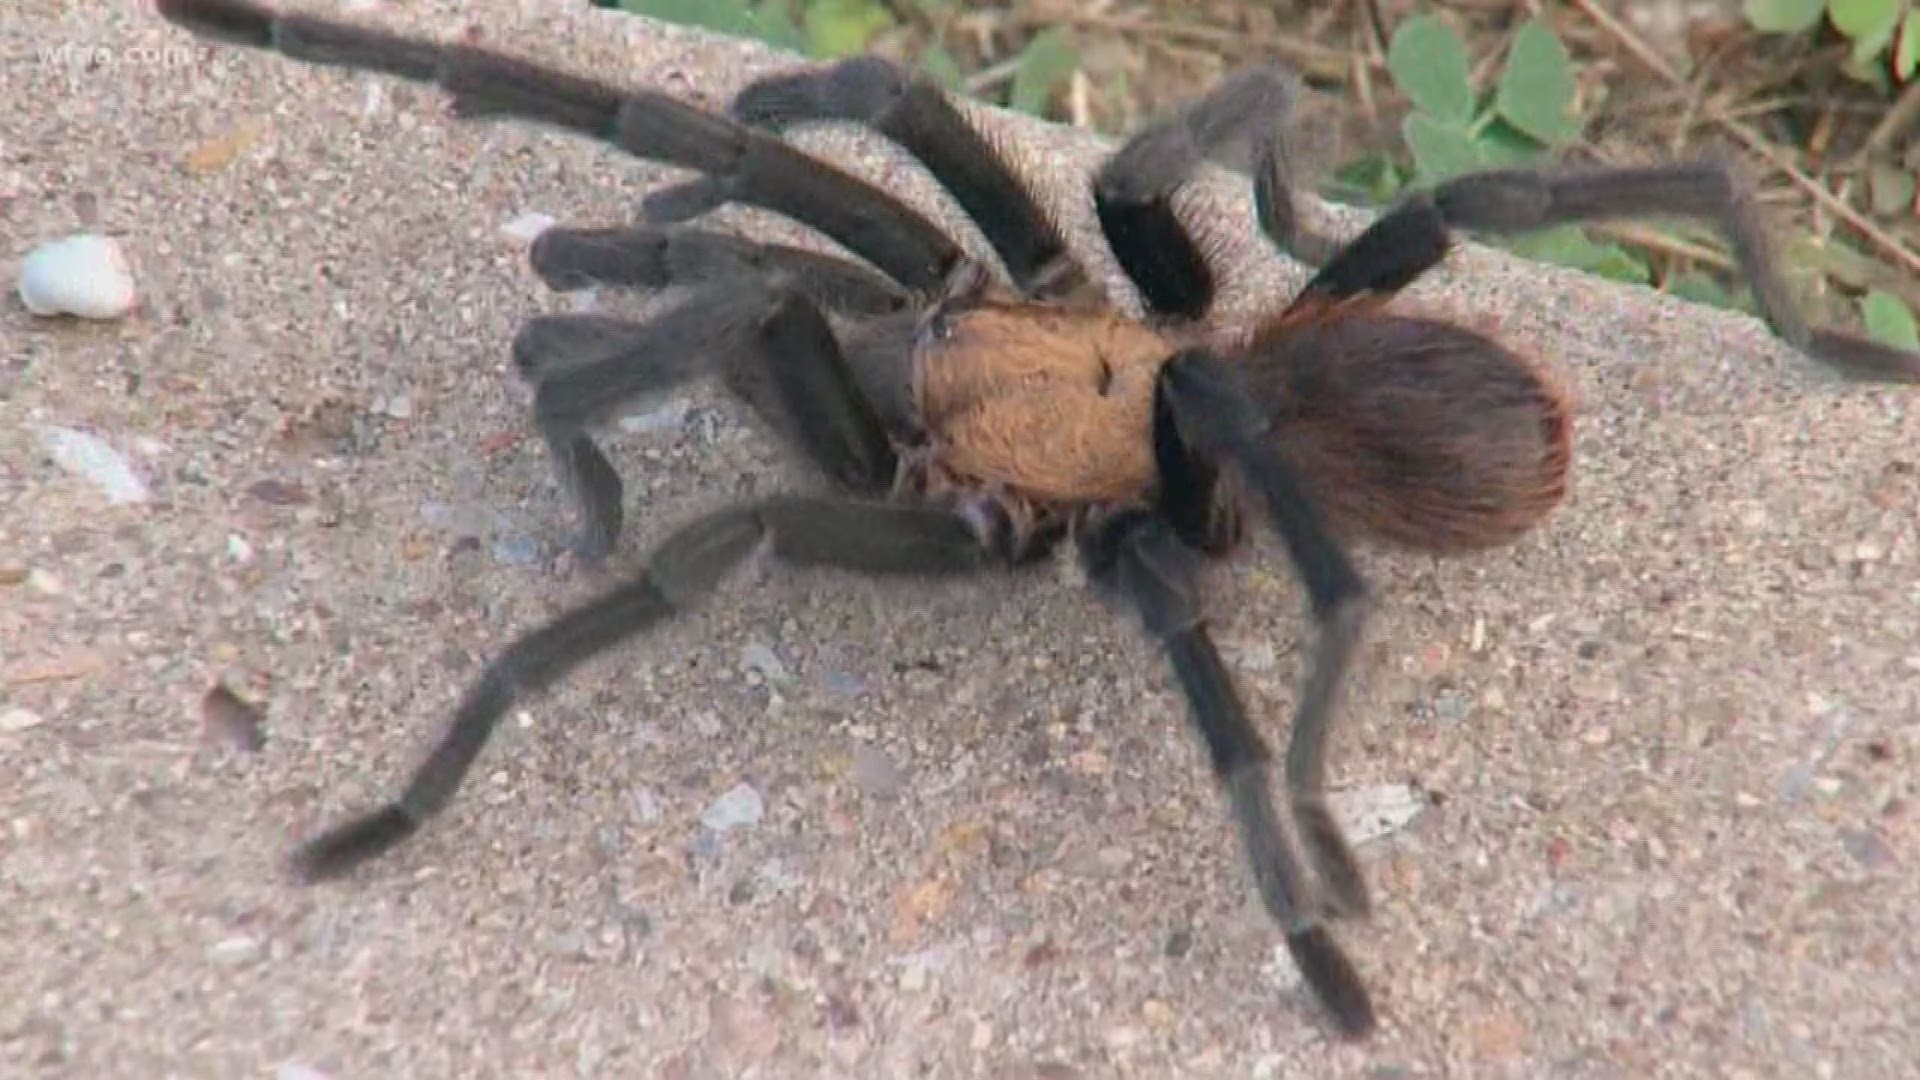 Things get spicy in August, when it's mating season for the Texas brown tarantula in Dallas area.